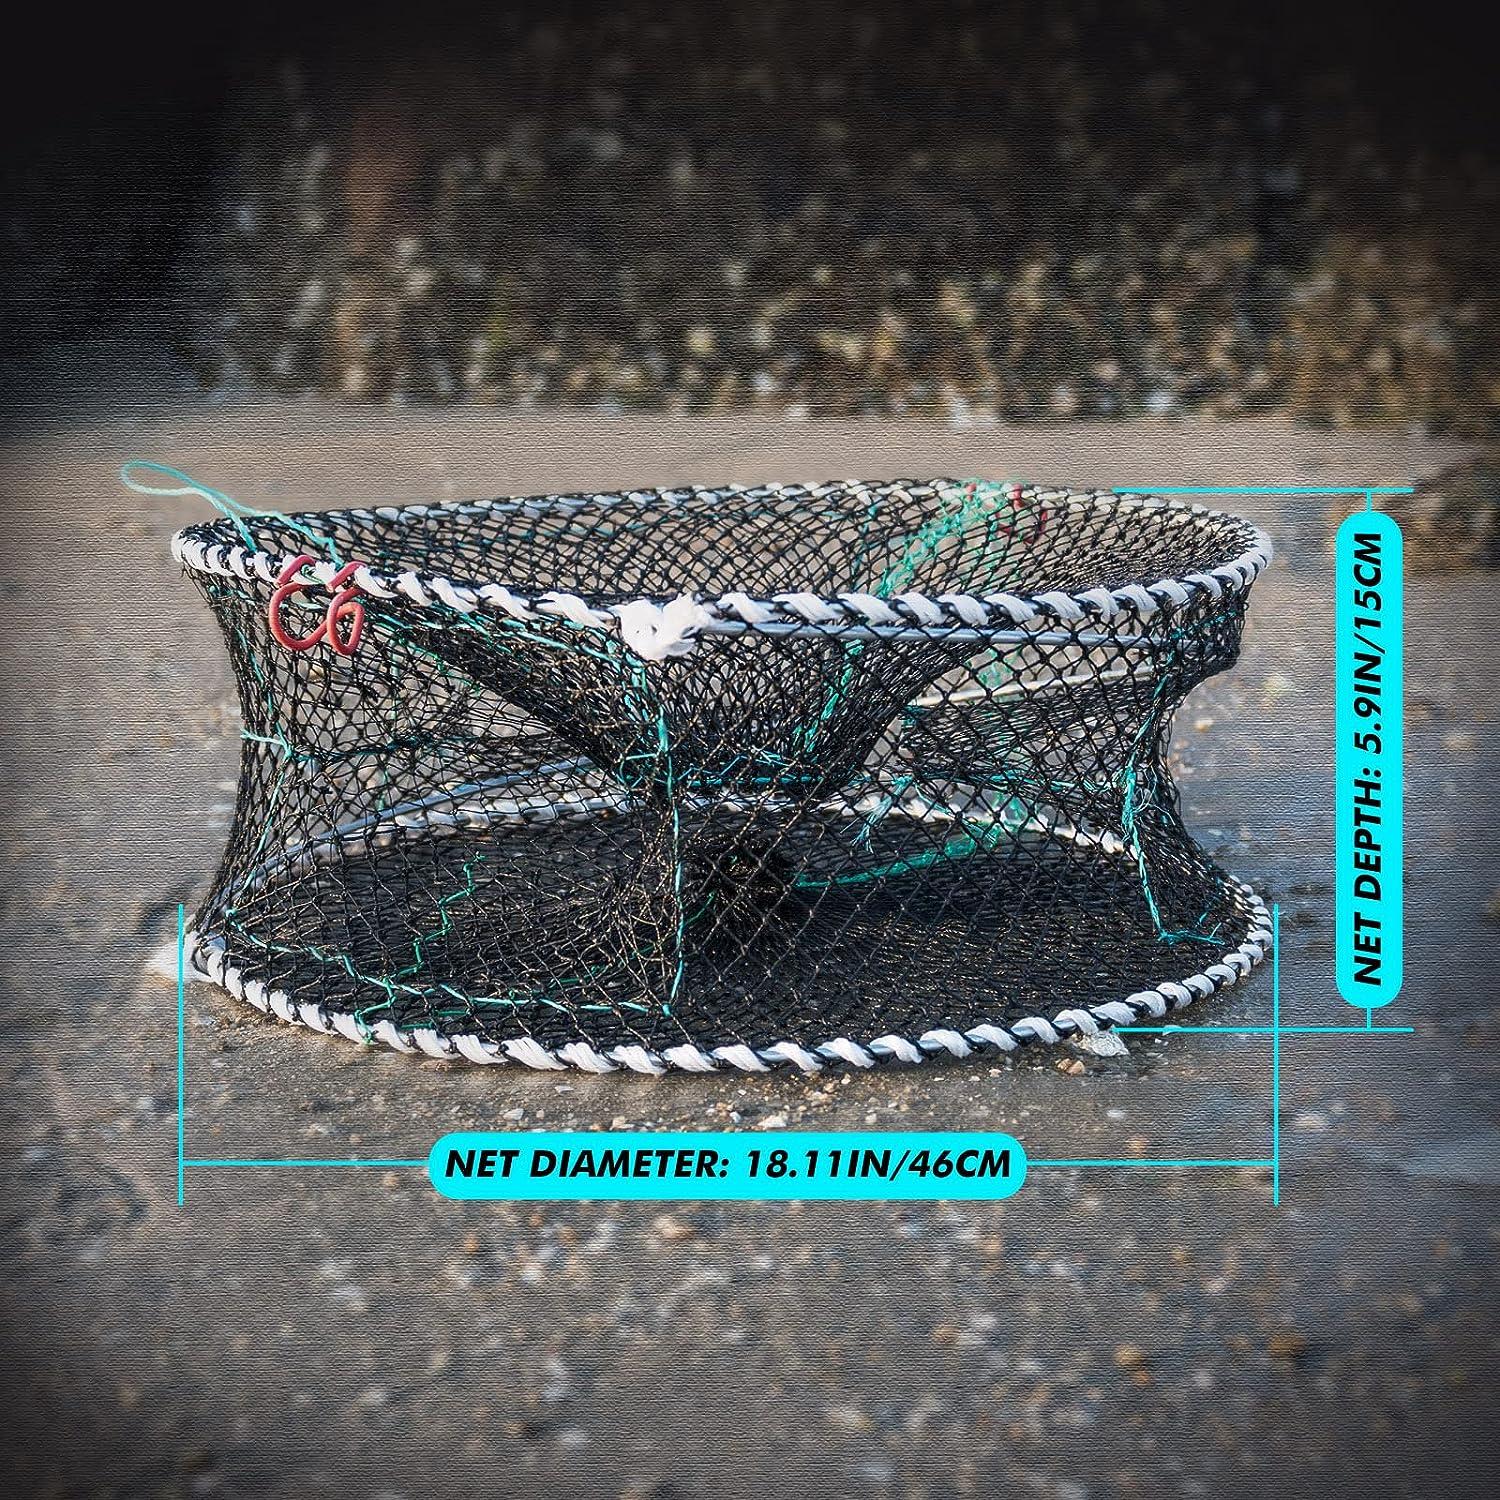 Portable Collapsible Crab Traps Foldable Crabbing Nets for Lobster Shrimp  Carp Crayfish Crab Baits Cast Mesh Trap Fishing Accessories